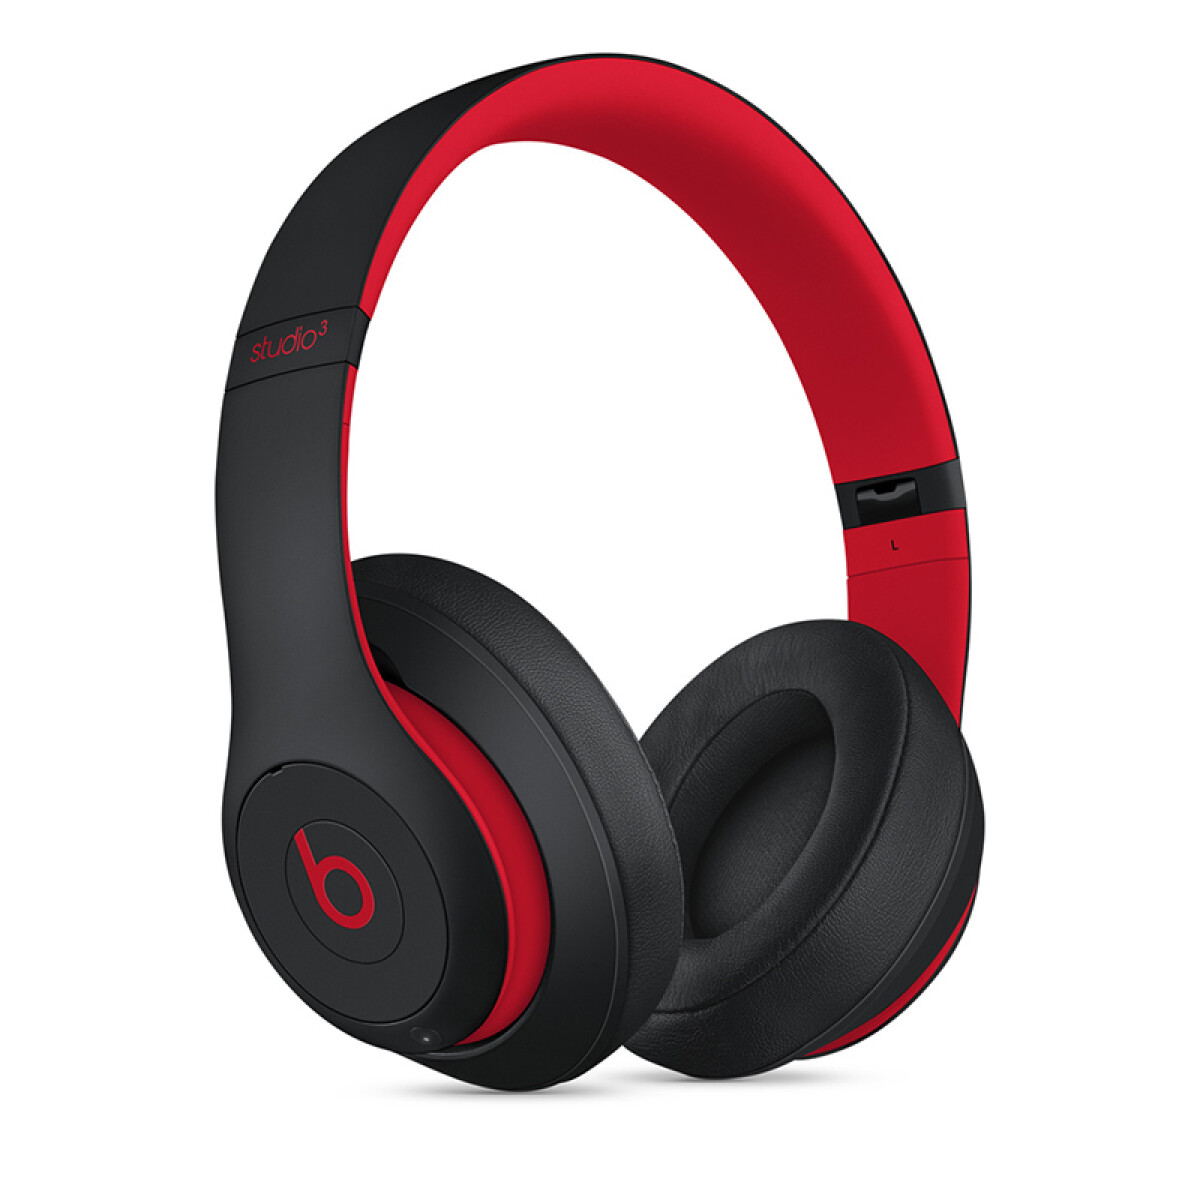 Auricular Beats Studio 3 wireless black and red - Unica 